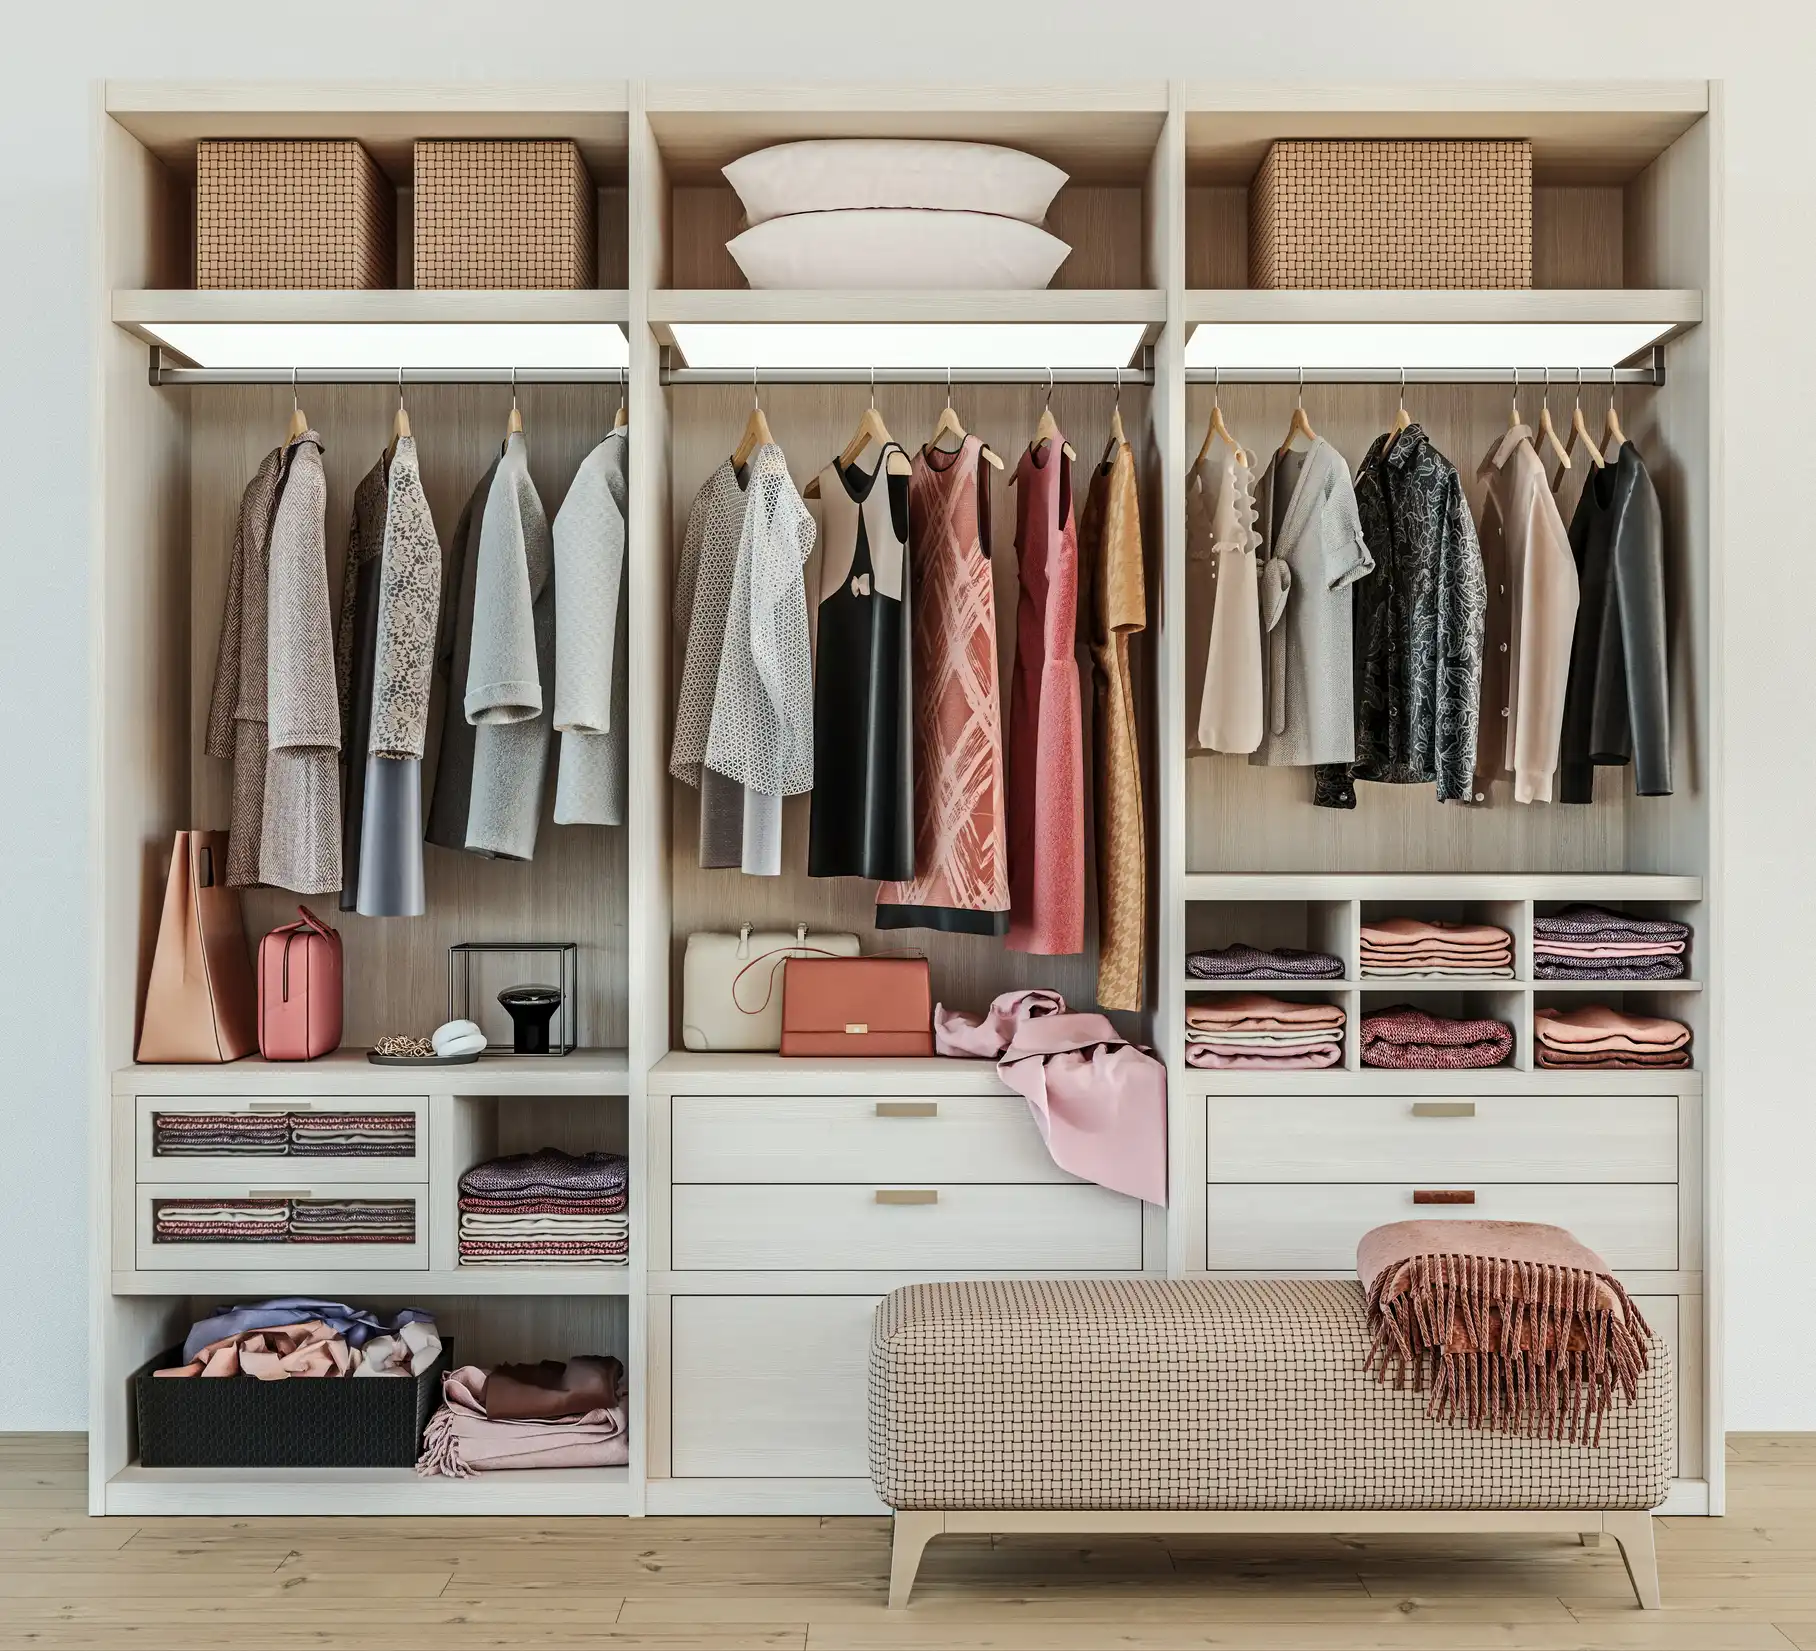 5 Tips on How To Maximize Your Closet Space